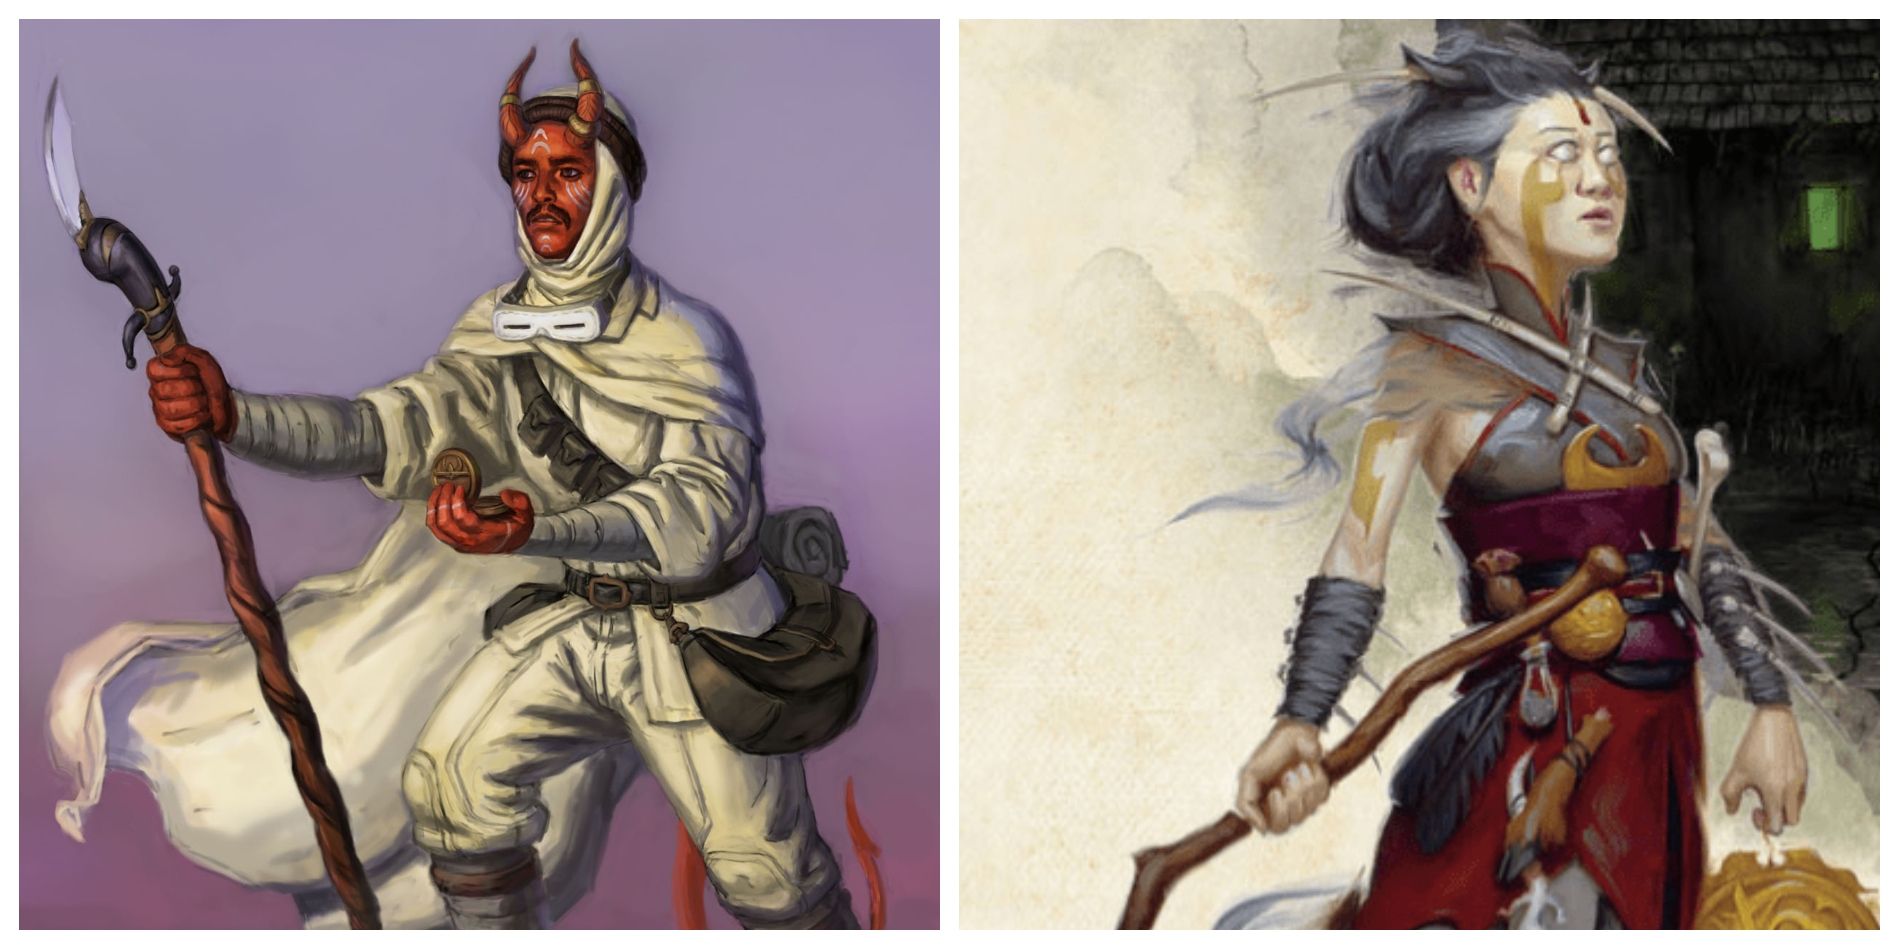 Level Up Advanced 5e Is Further Away From D&D Than Necessary - Level Up tiefling and DandD Warlock